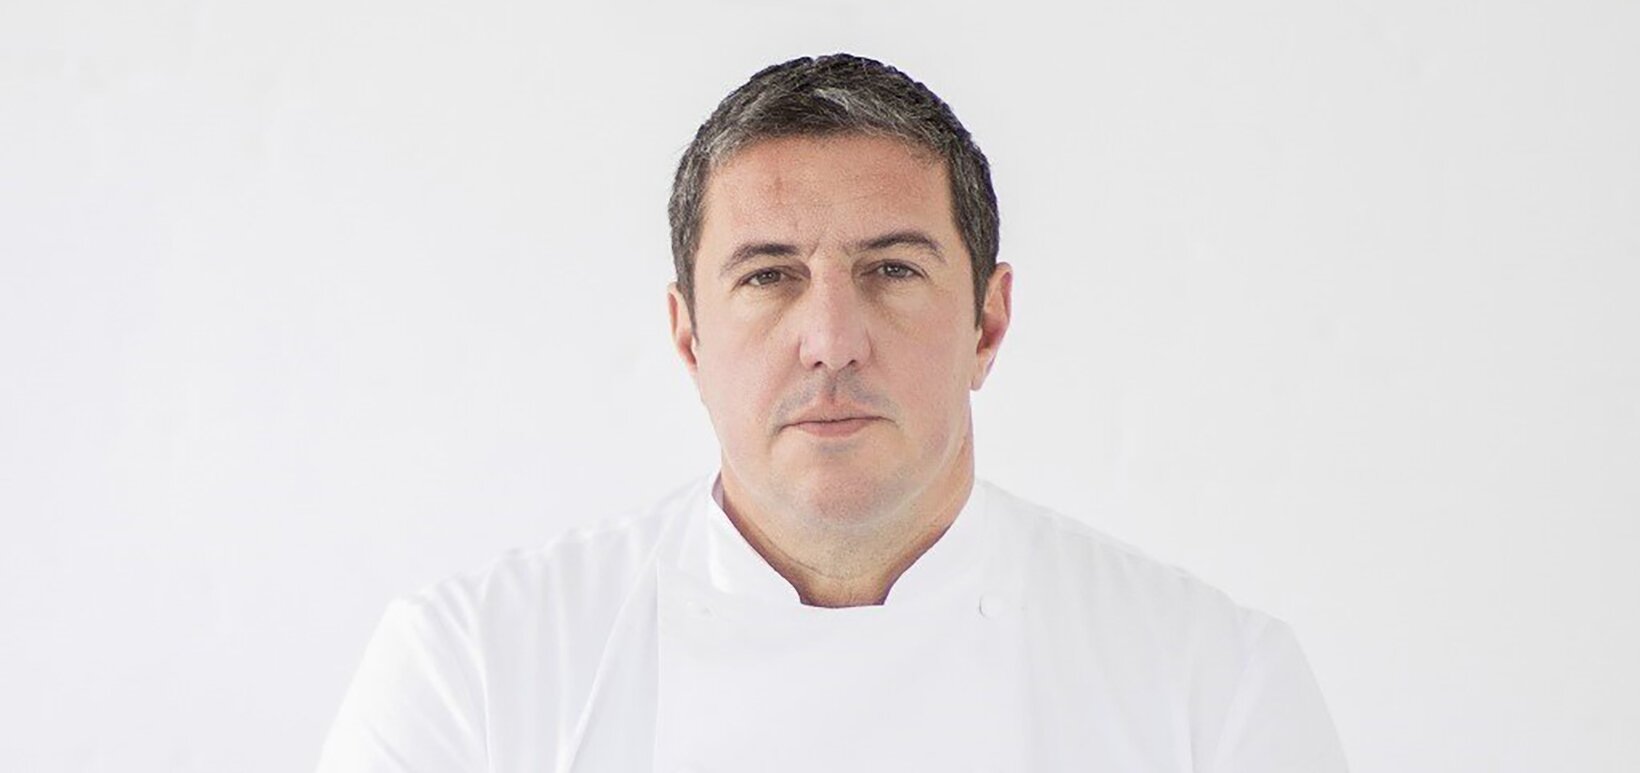 Claude Bosi to oversee restaurant at the Peninsula London hotel